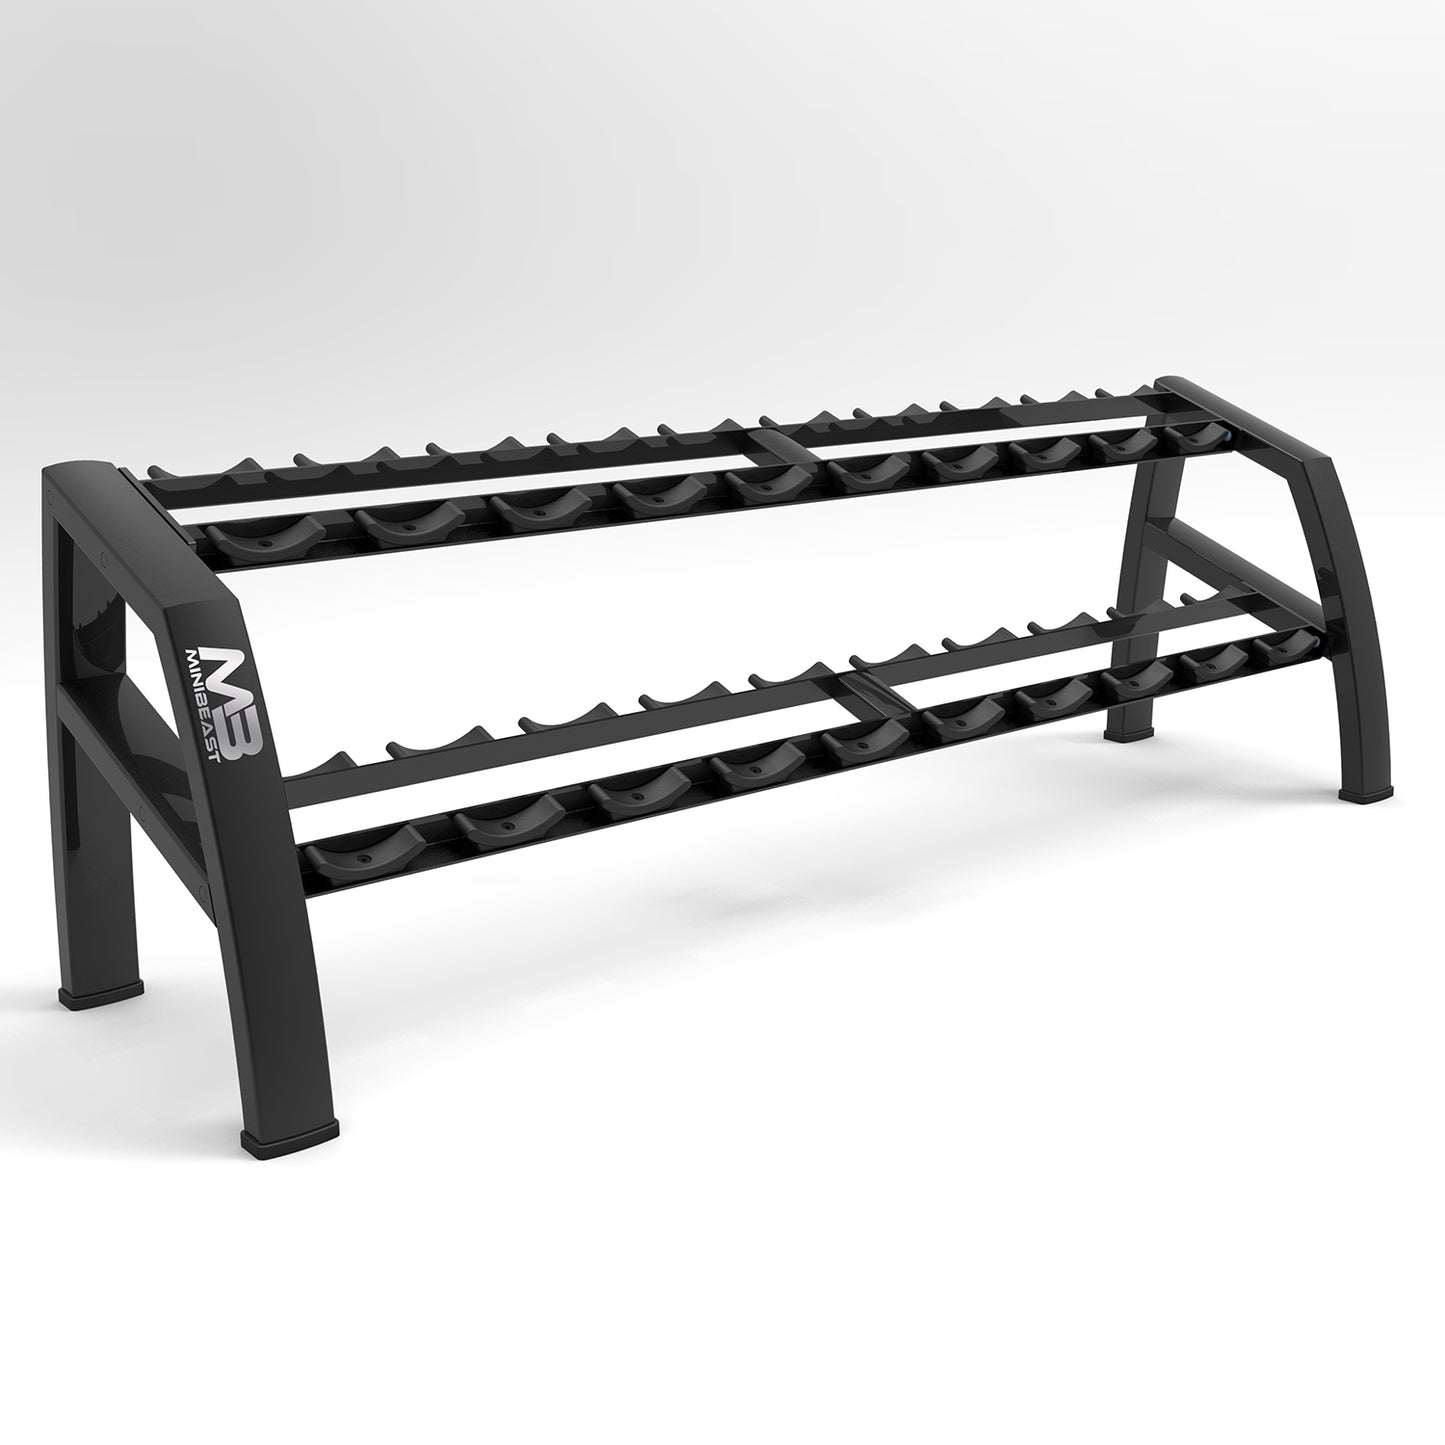 MB73 - 10 Pairs Dumbell rack